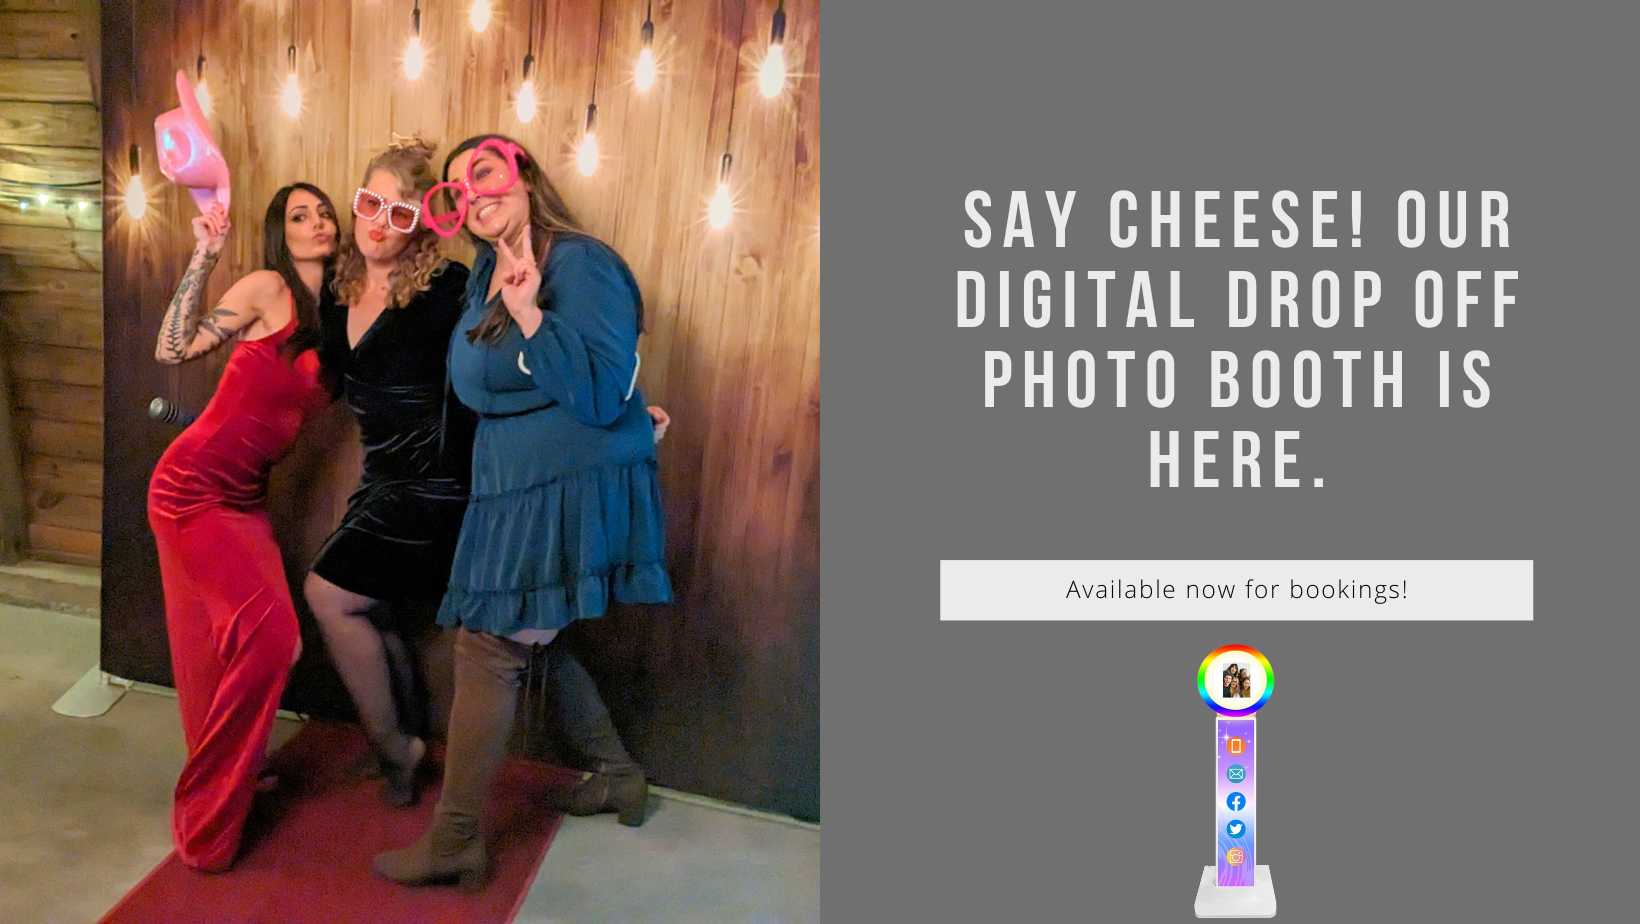 advertisement for Reflectionz Photo Booths' new digital drop off option for only $375